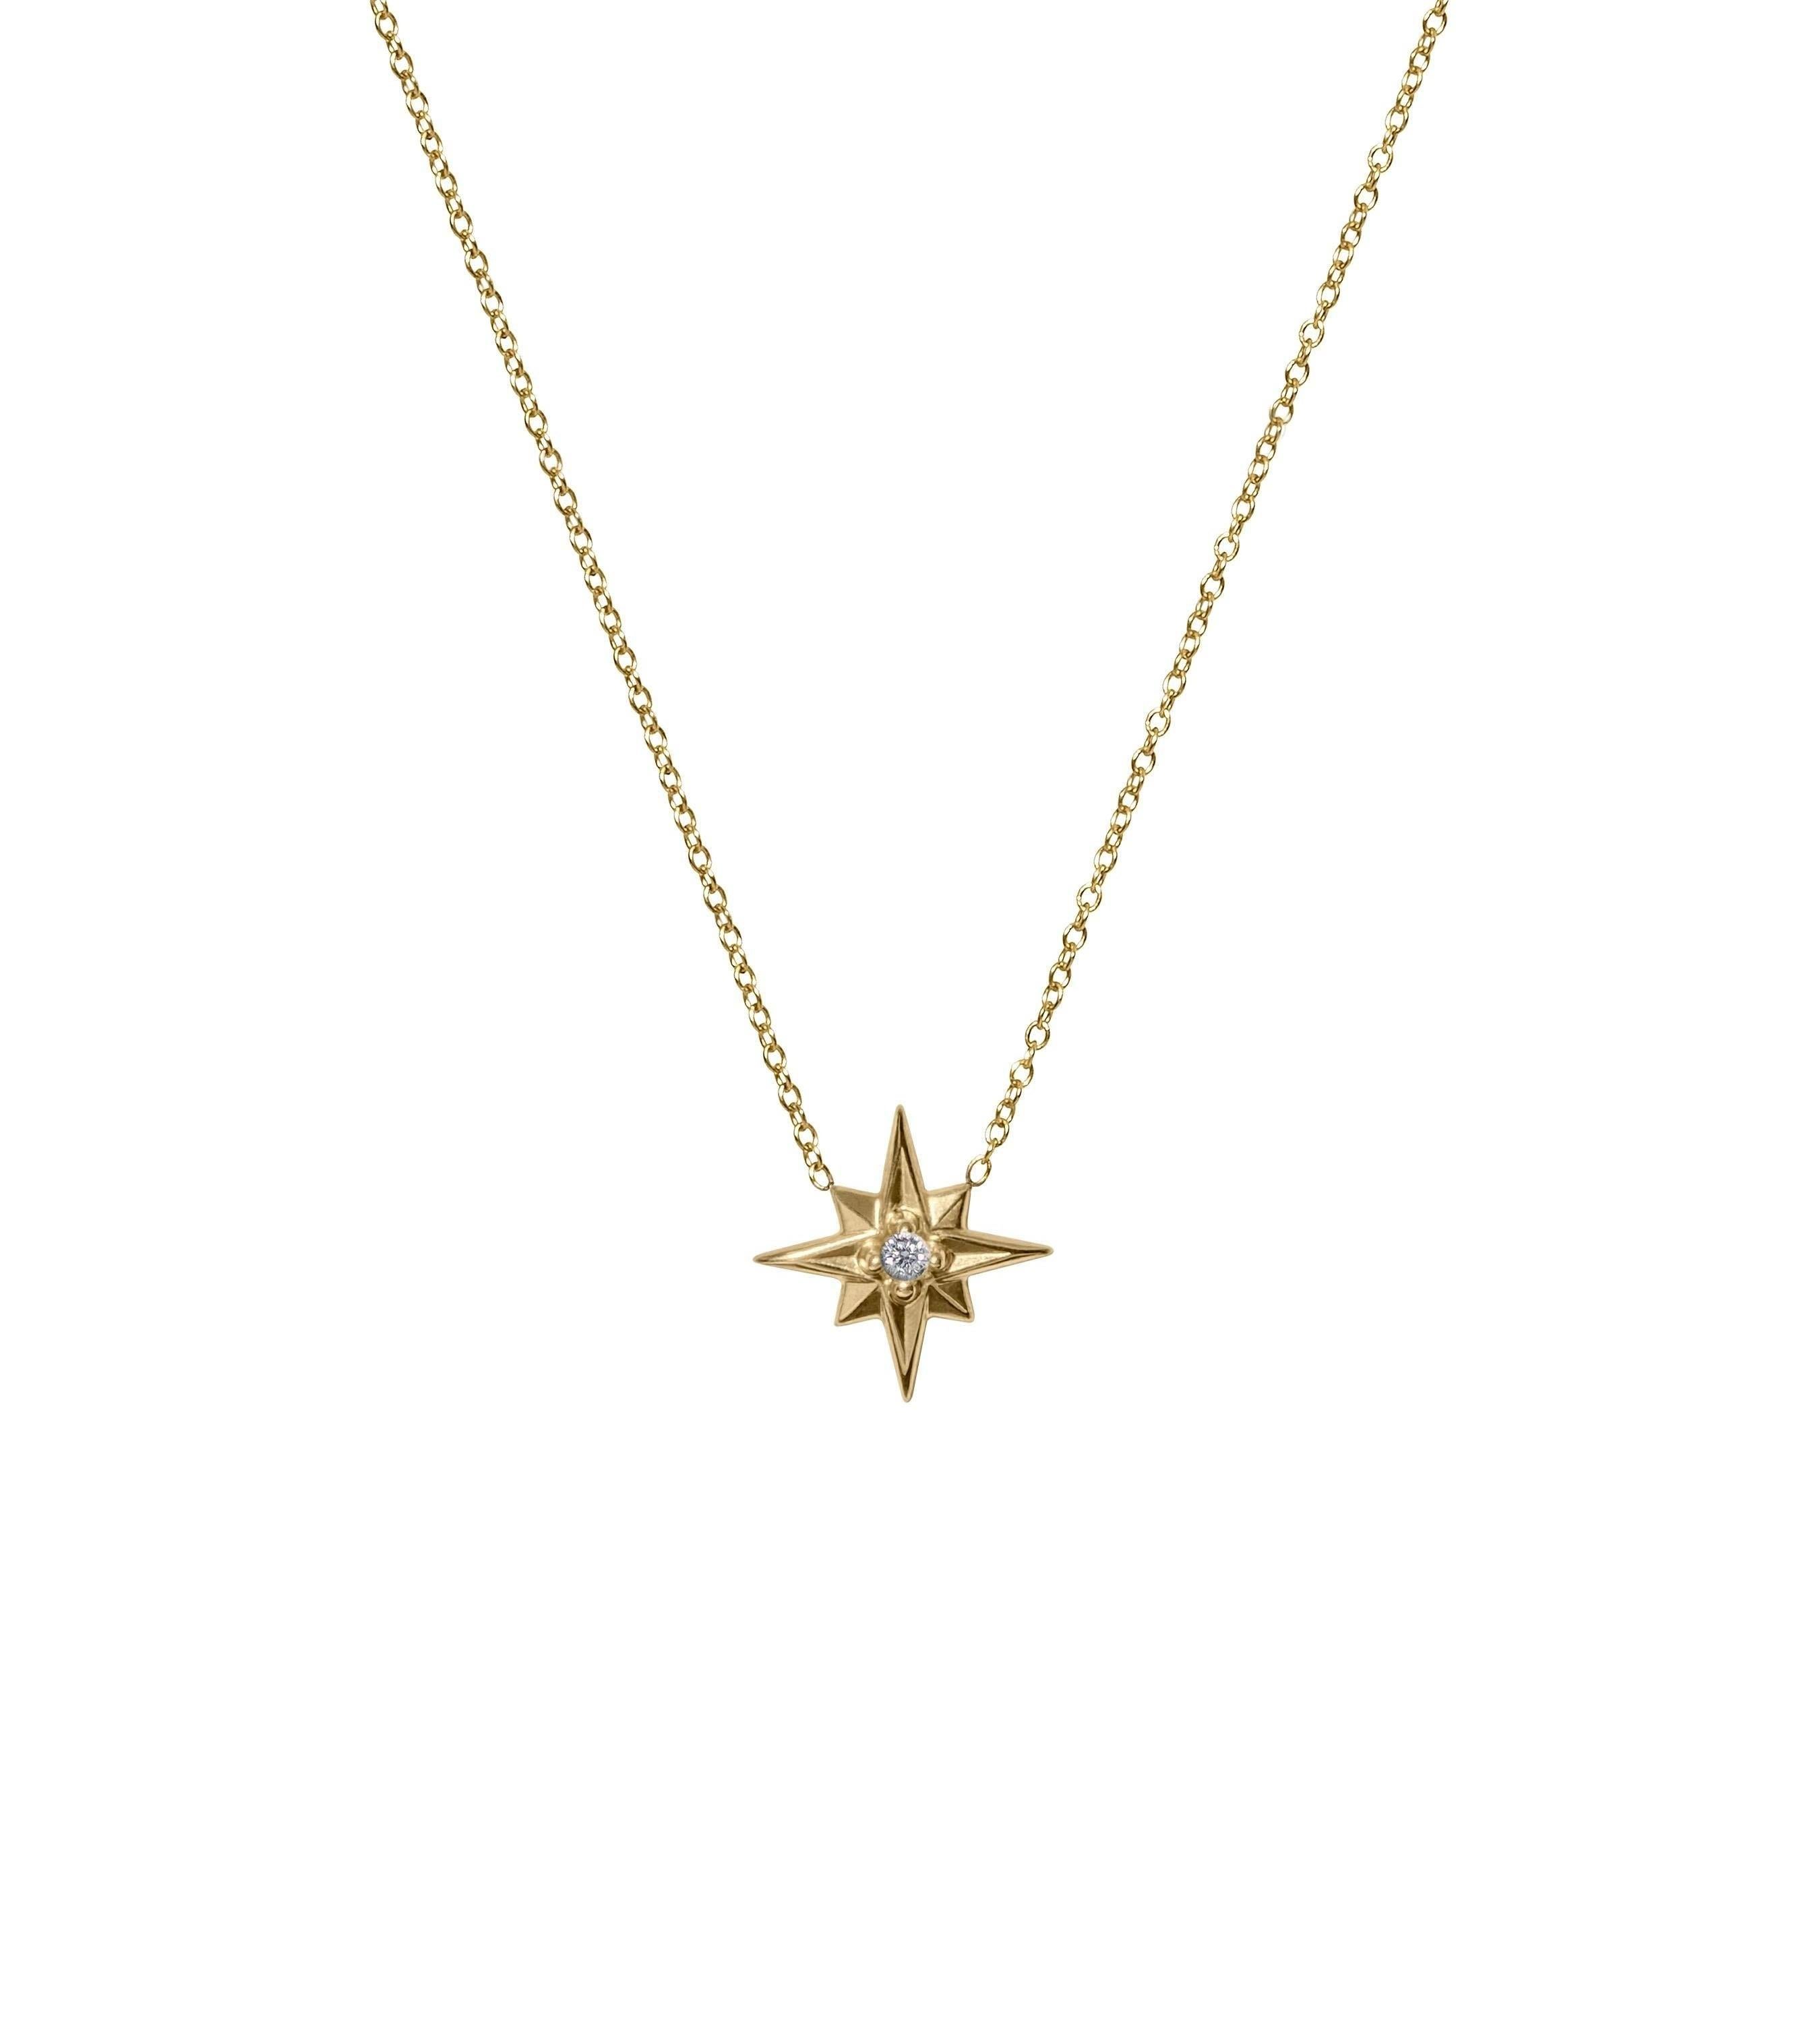 Contemporary Star Pendant Necklace 14KY Gold and Diamond For Sale